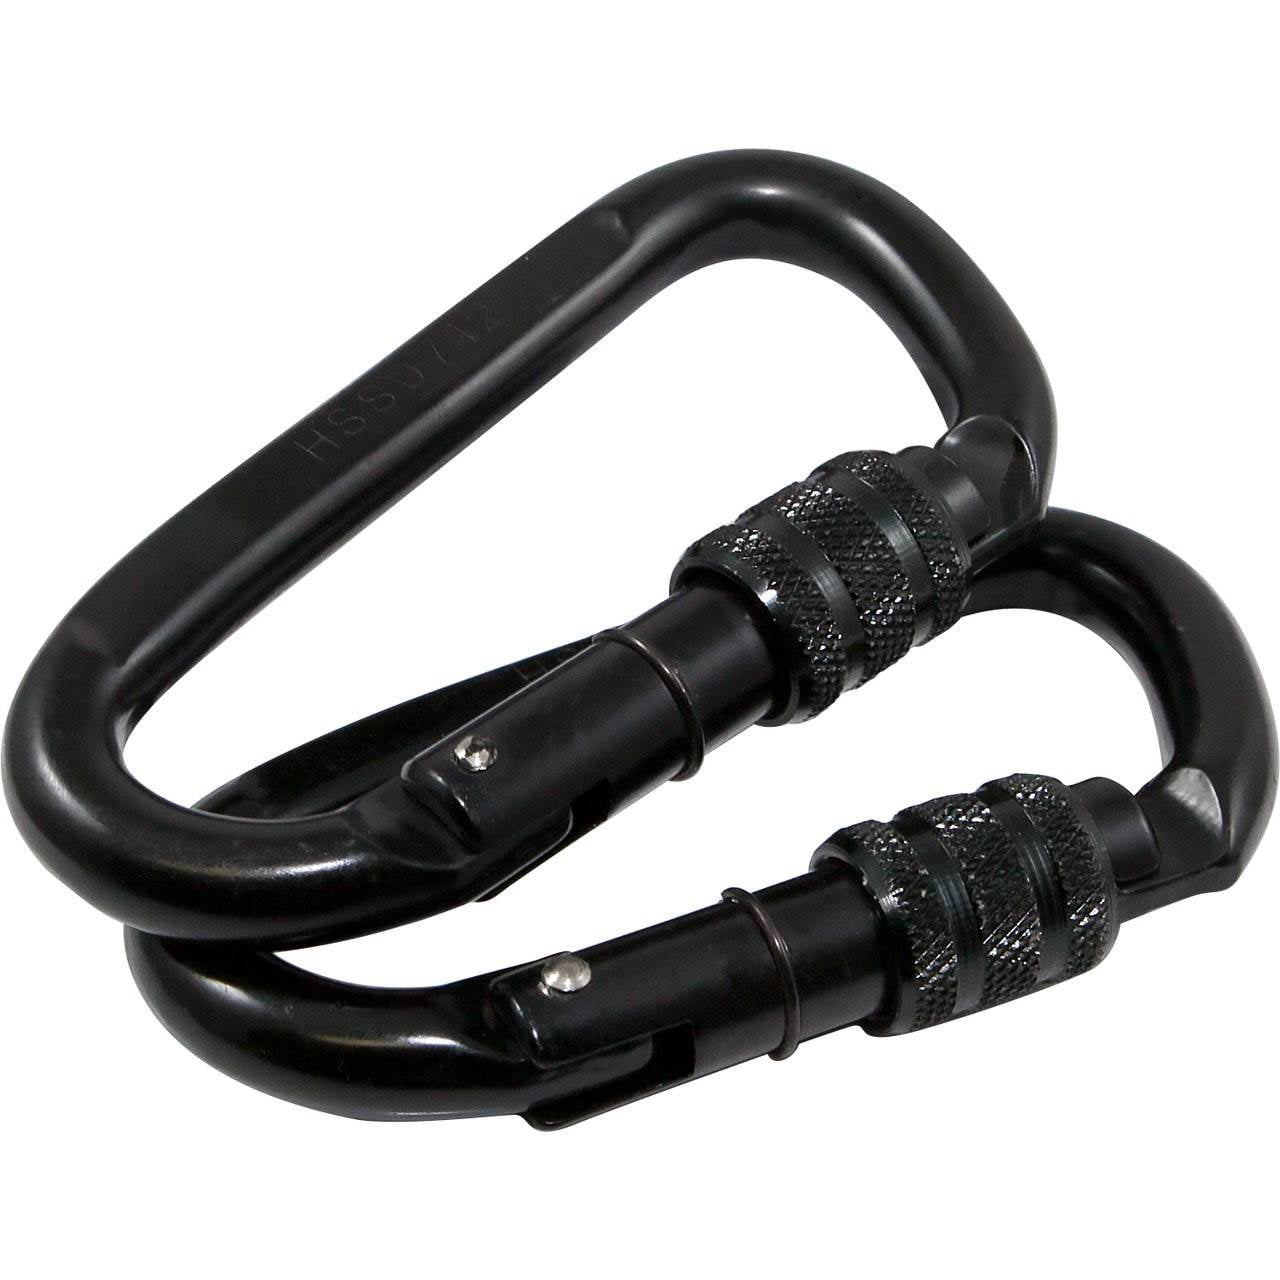 2-Pack Hunter Safety System High-Strength Carabiners